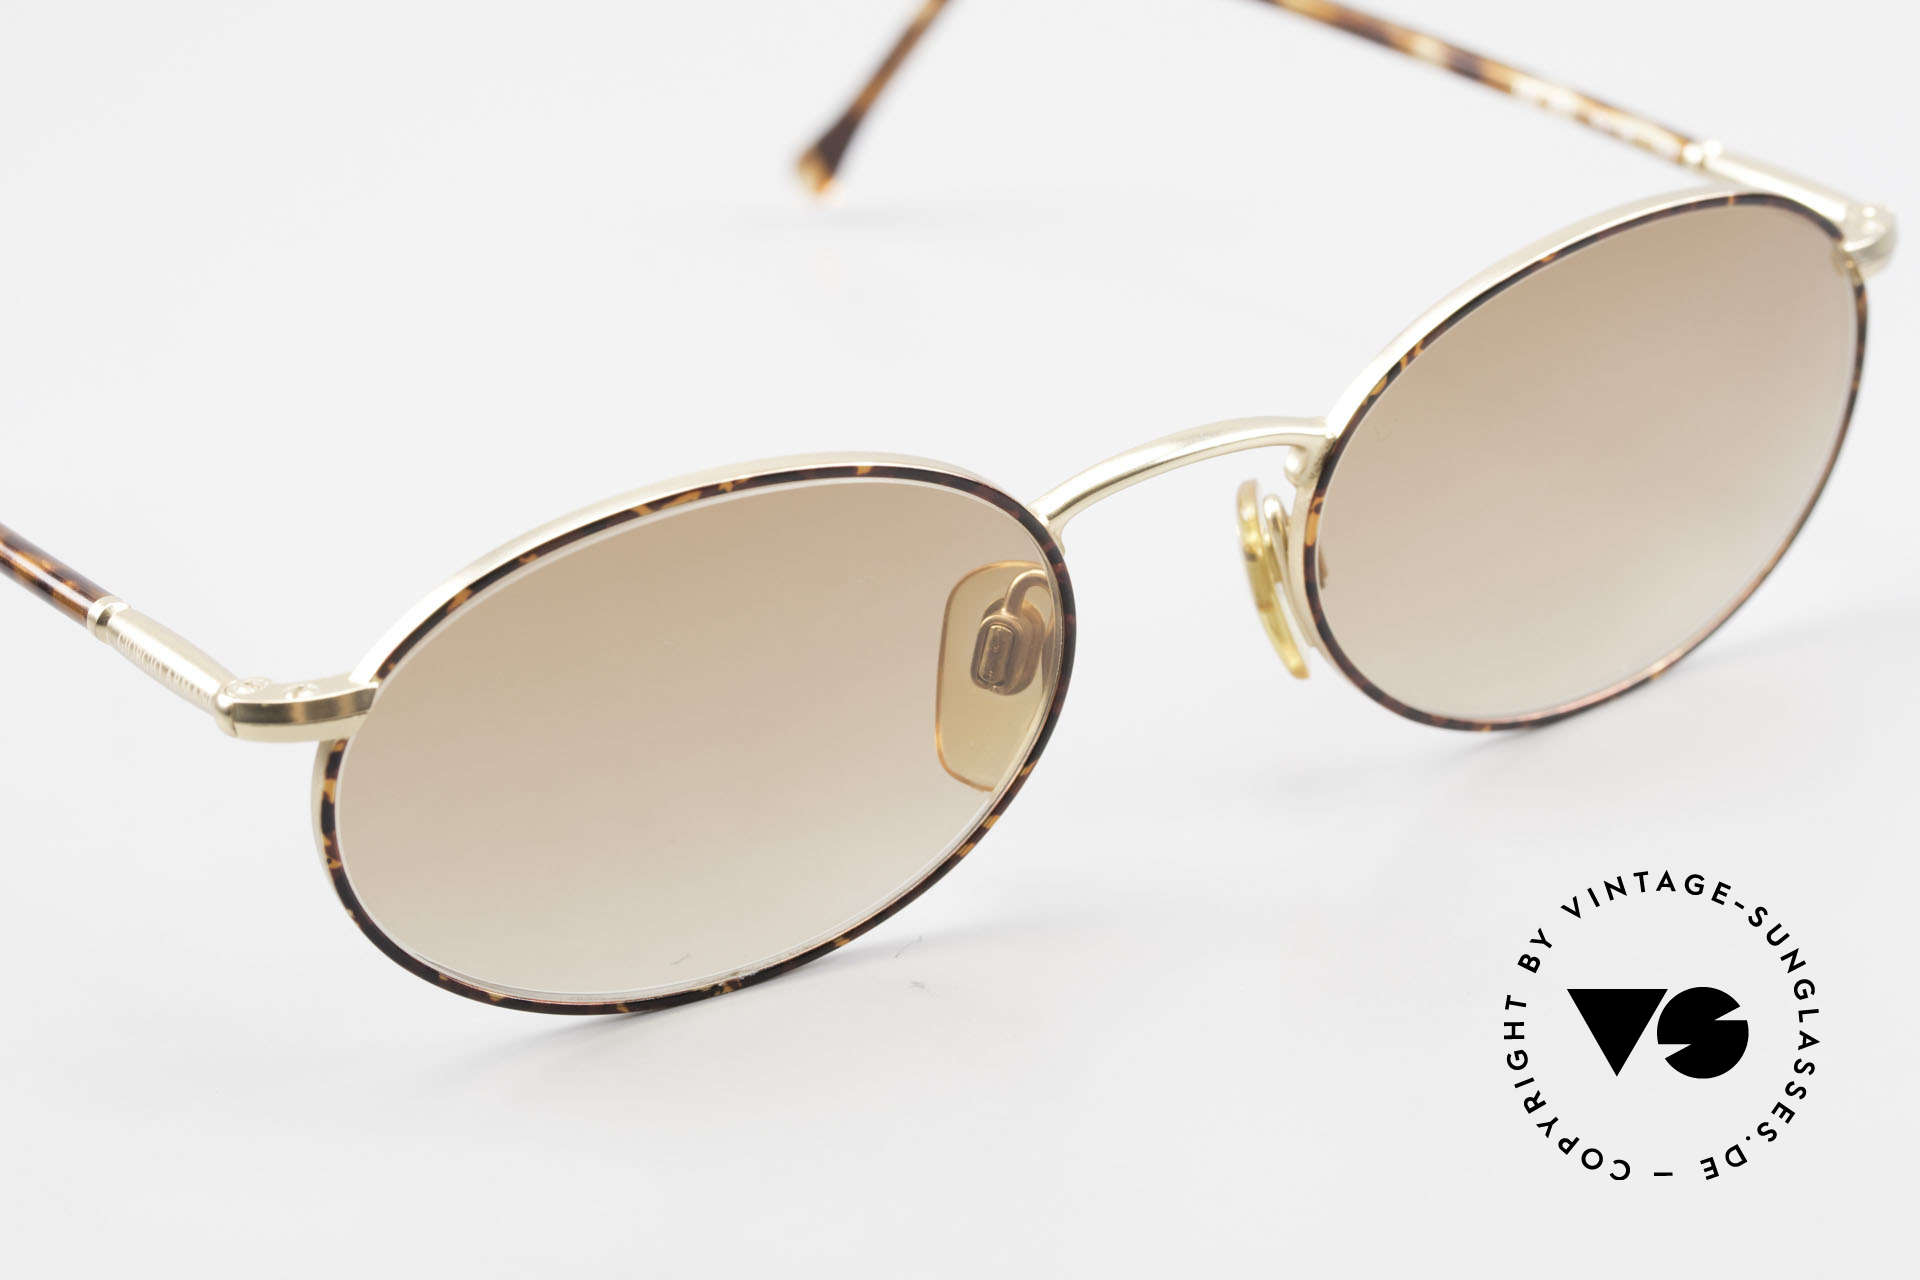 Giorgio Armani 192 80's Sunglasses Oval Vintage, metal frame (in size 50-20) with flexible spring hinges, Made for Men and Women